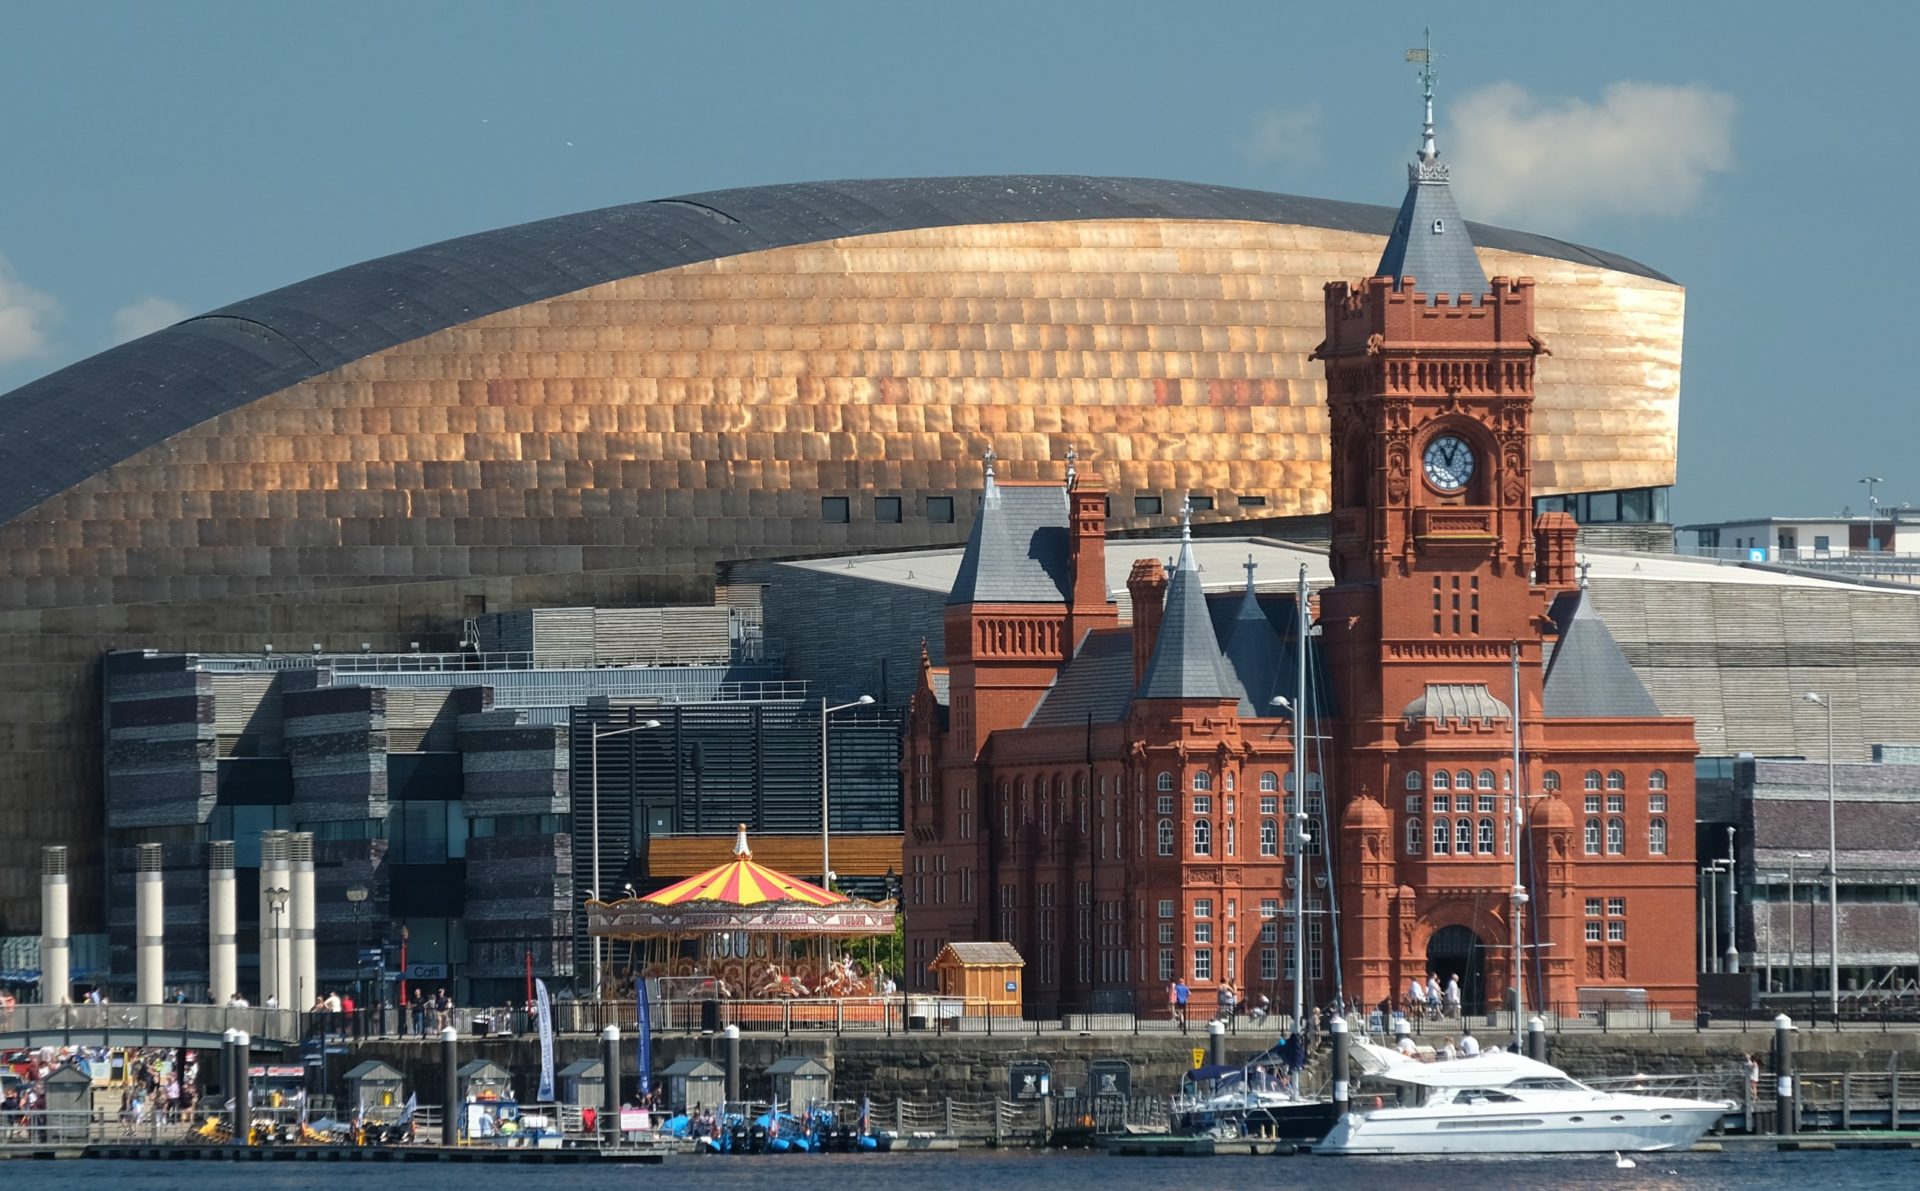 Cardiff Bay has been a huge regeneration project in the Welsh capital, helping to increase the quality of life (and property prices) for local residents. This is surely one of the best areas in the UK to buy property.